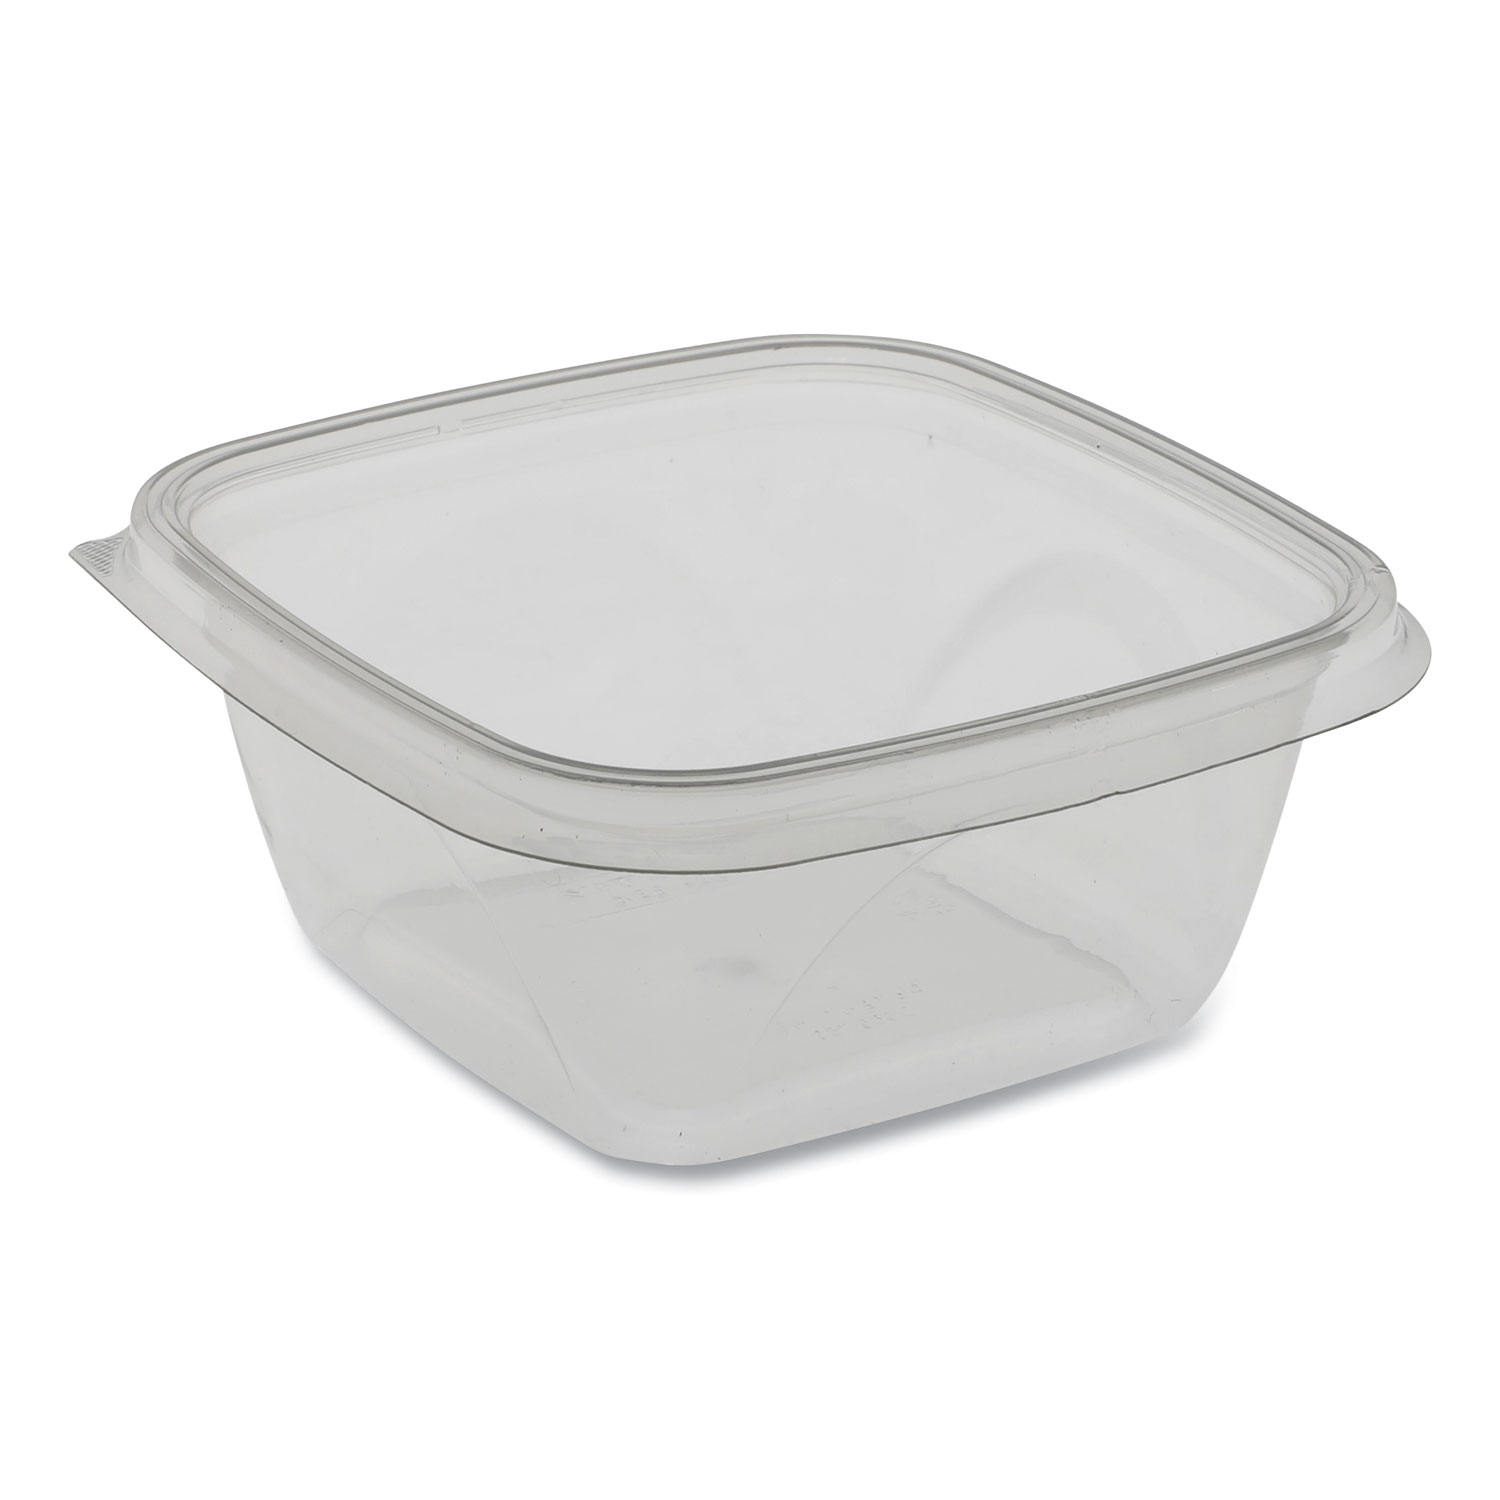  Pactiv SAC0516 EarthChoice Recycled PET Square Base Salad Containers, 5 x 5 x 1.75, 16 oz,  Clear, 504/Carton (PCTSAC0516) 